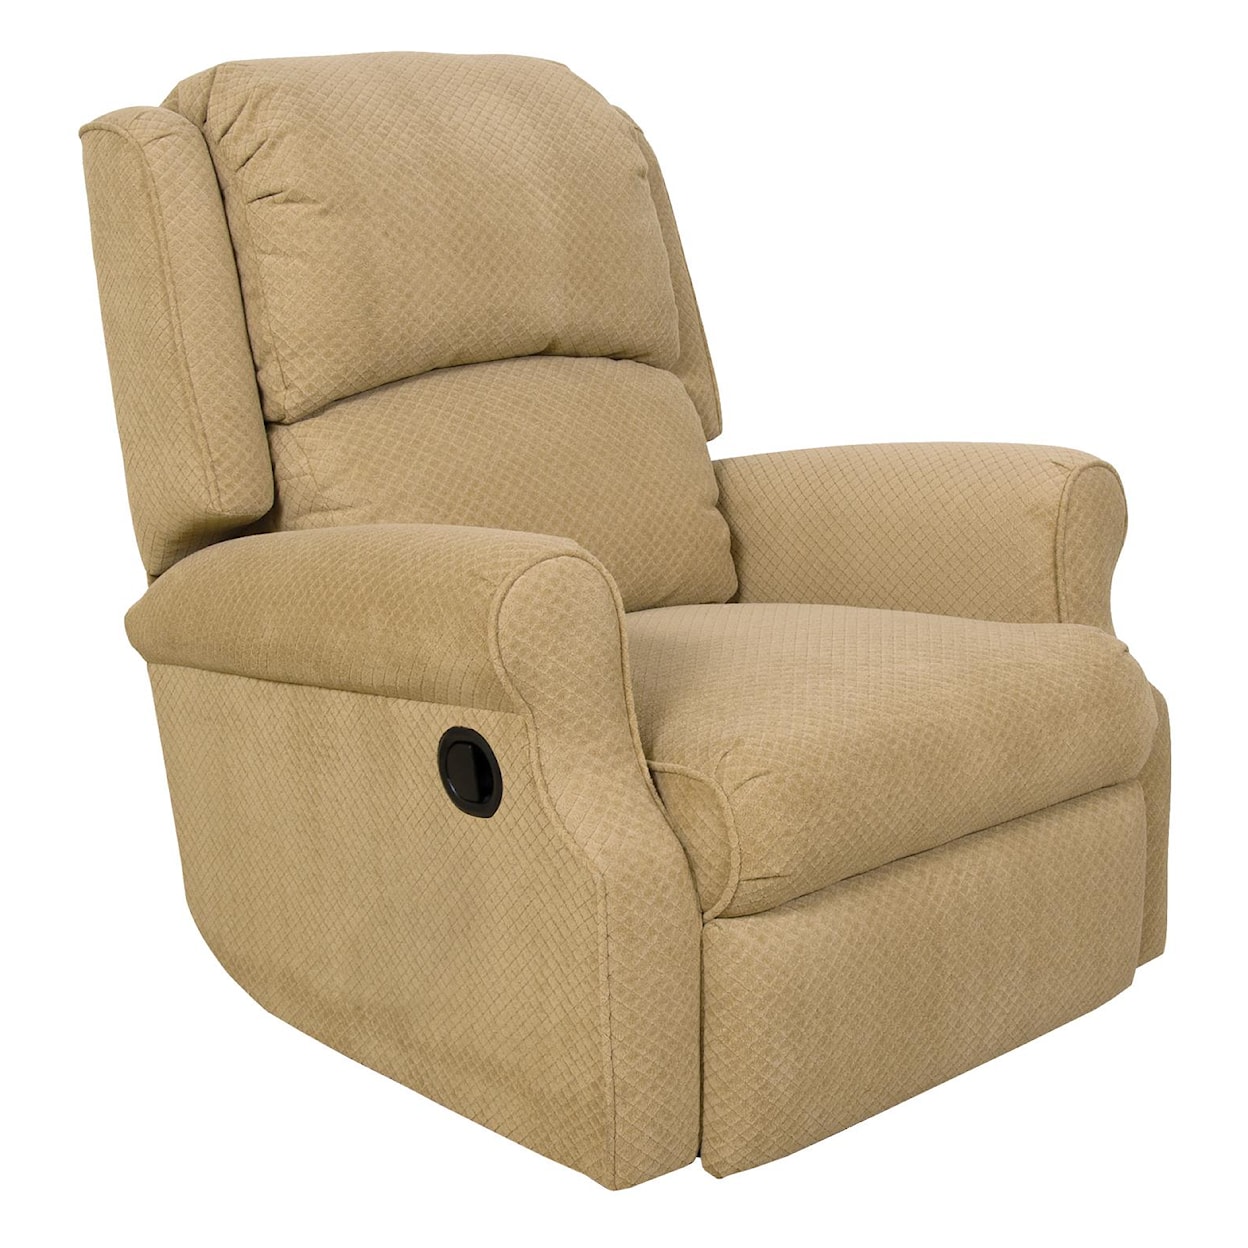 Tennessee Custom Upholstery 210 Series Reclining Lift Chair